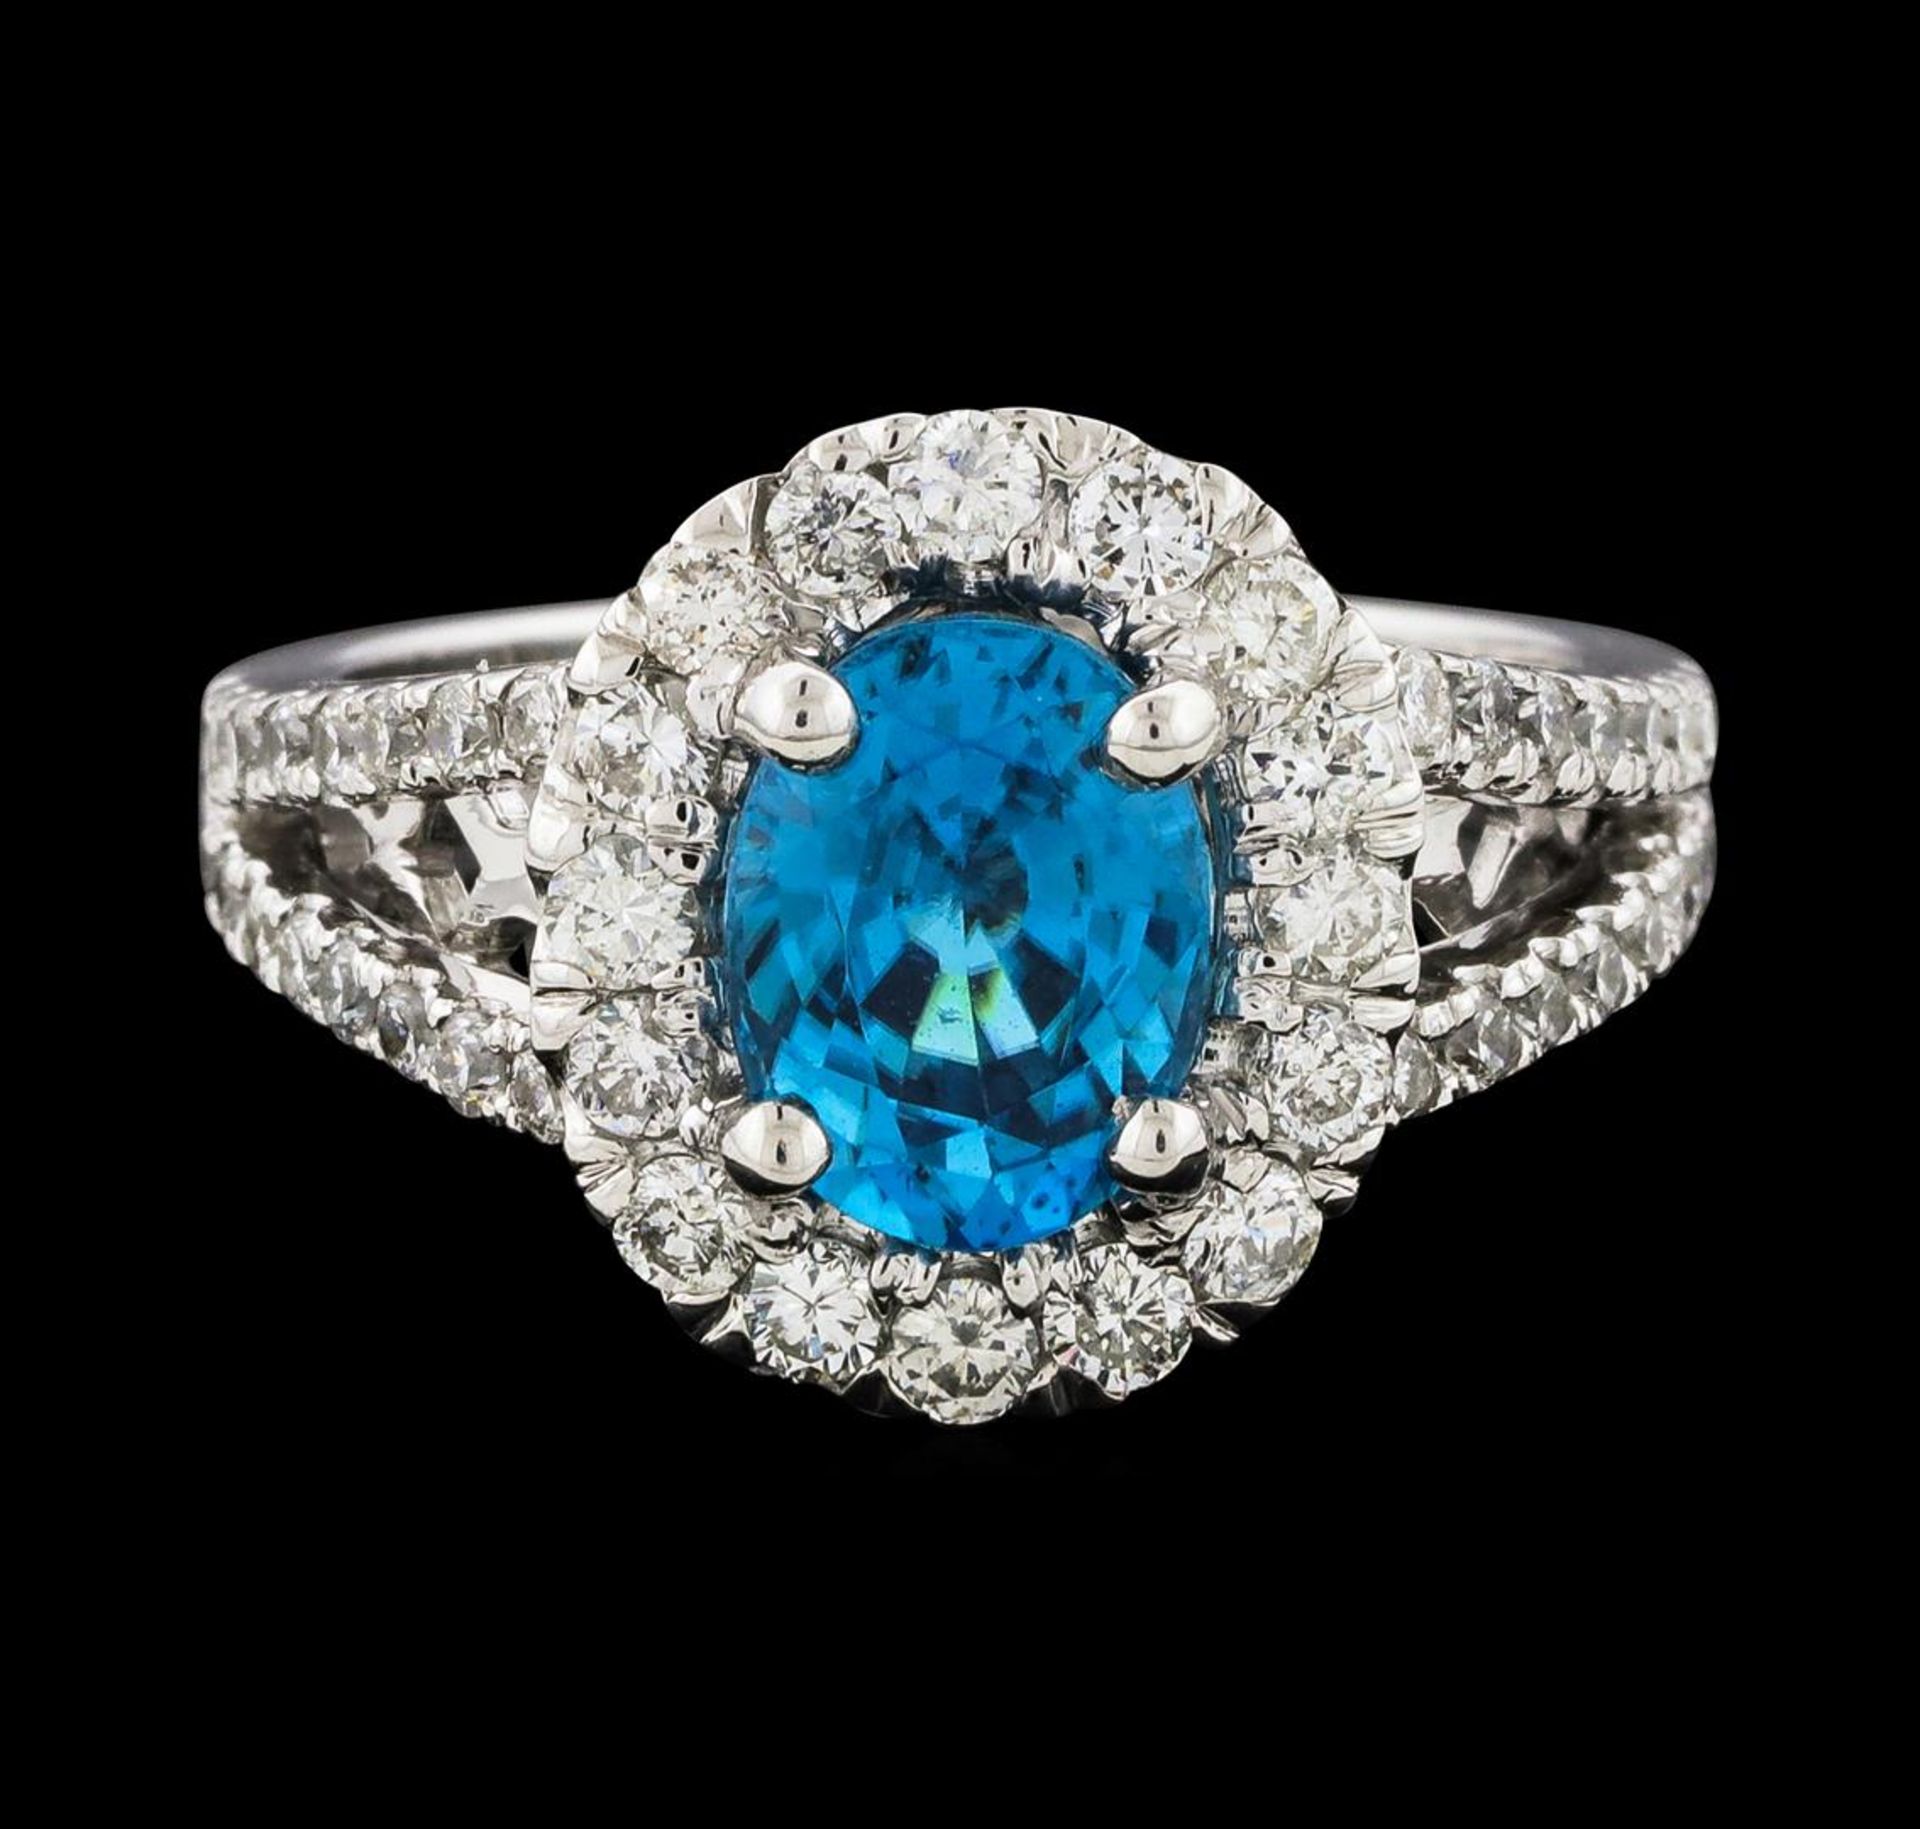 2.81 ctw Blue Zircon and Diamond Ring - 14KT White Gold - Image 2 of 5